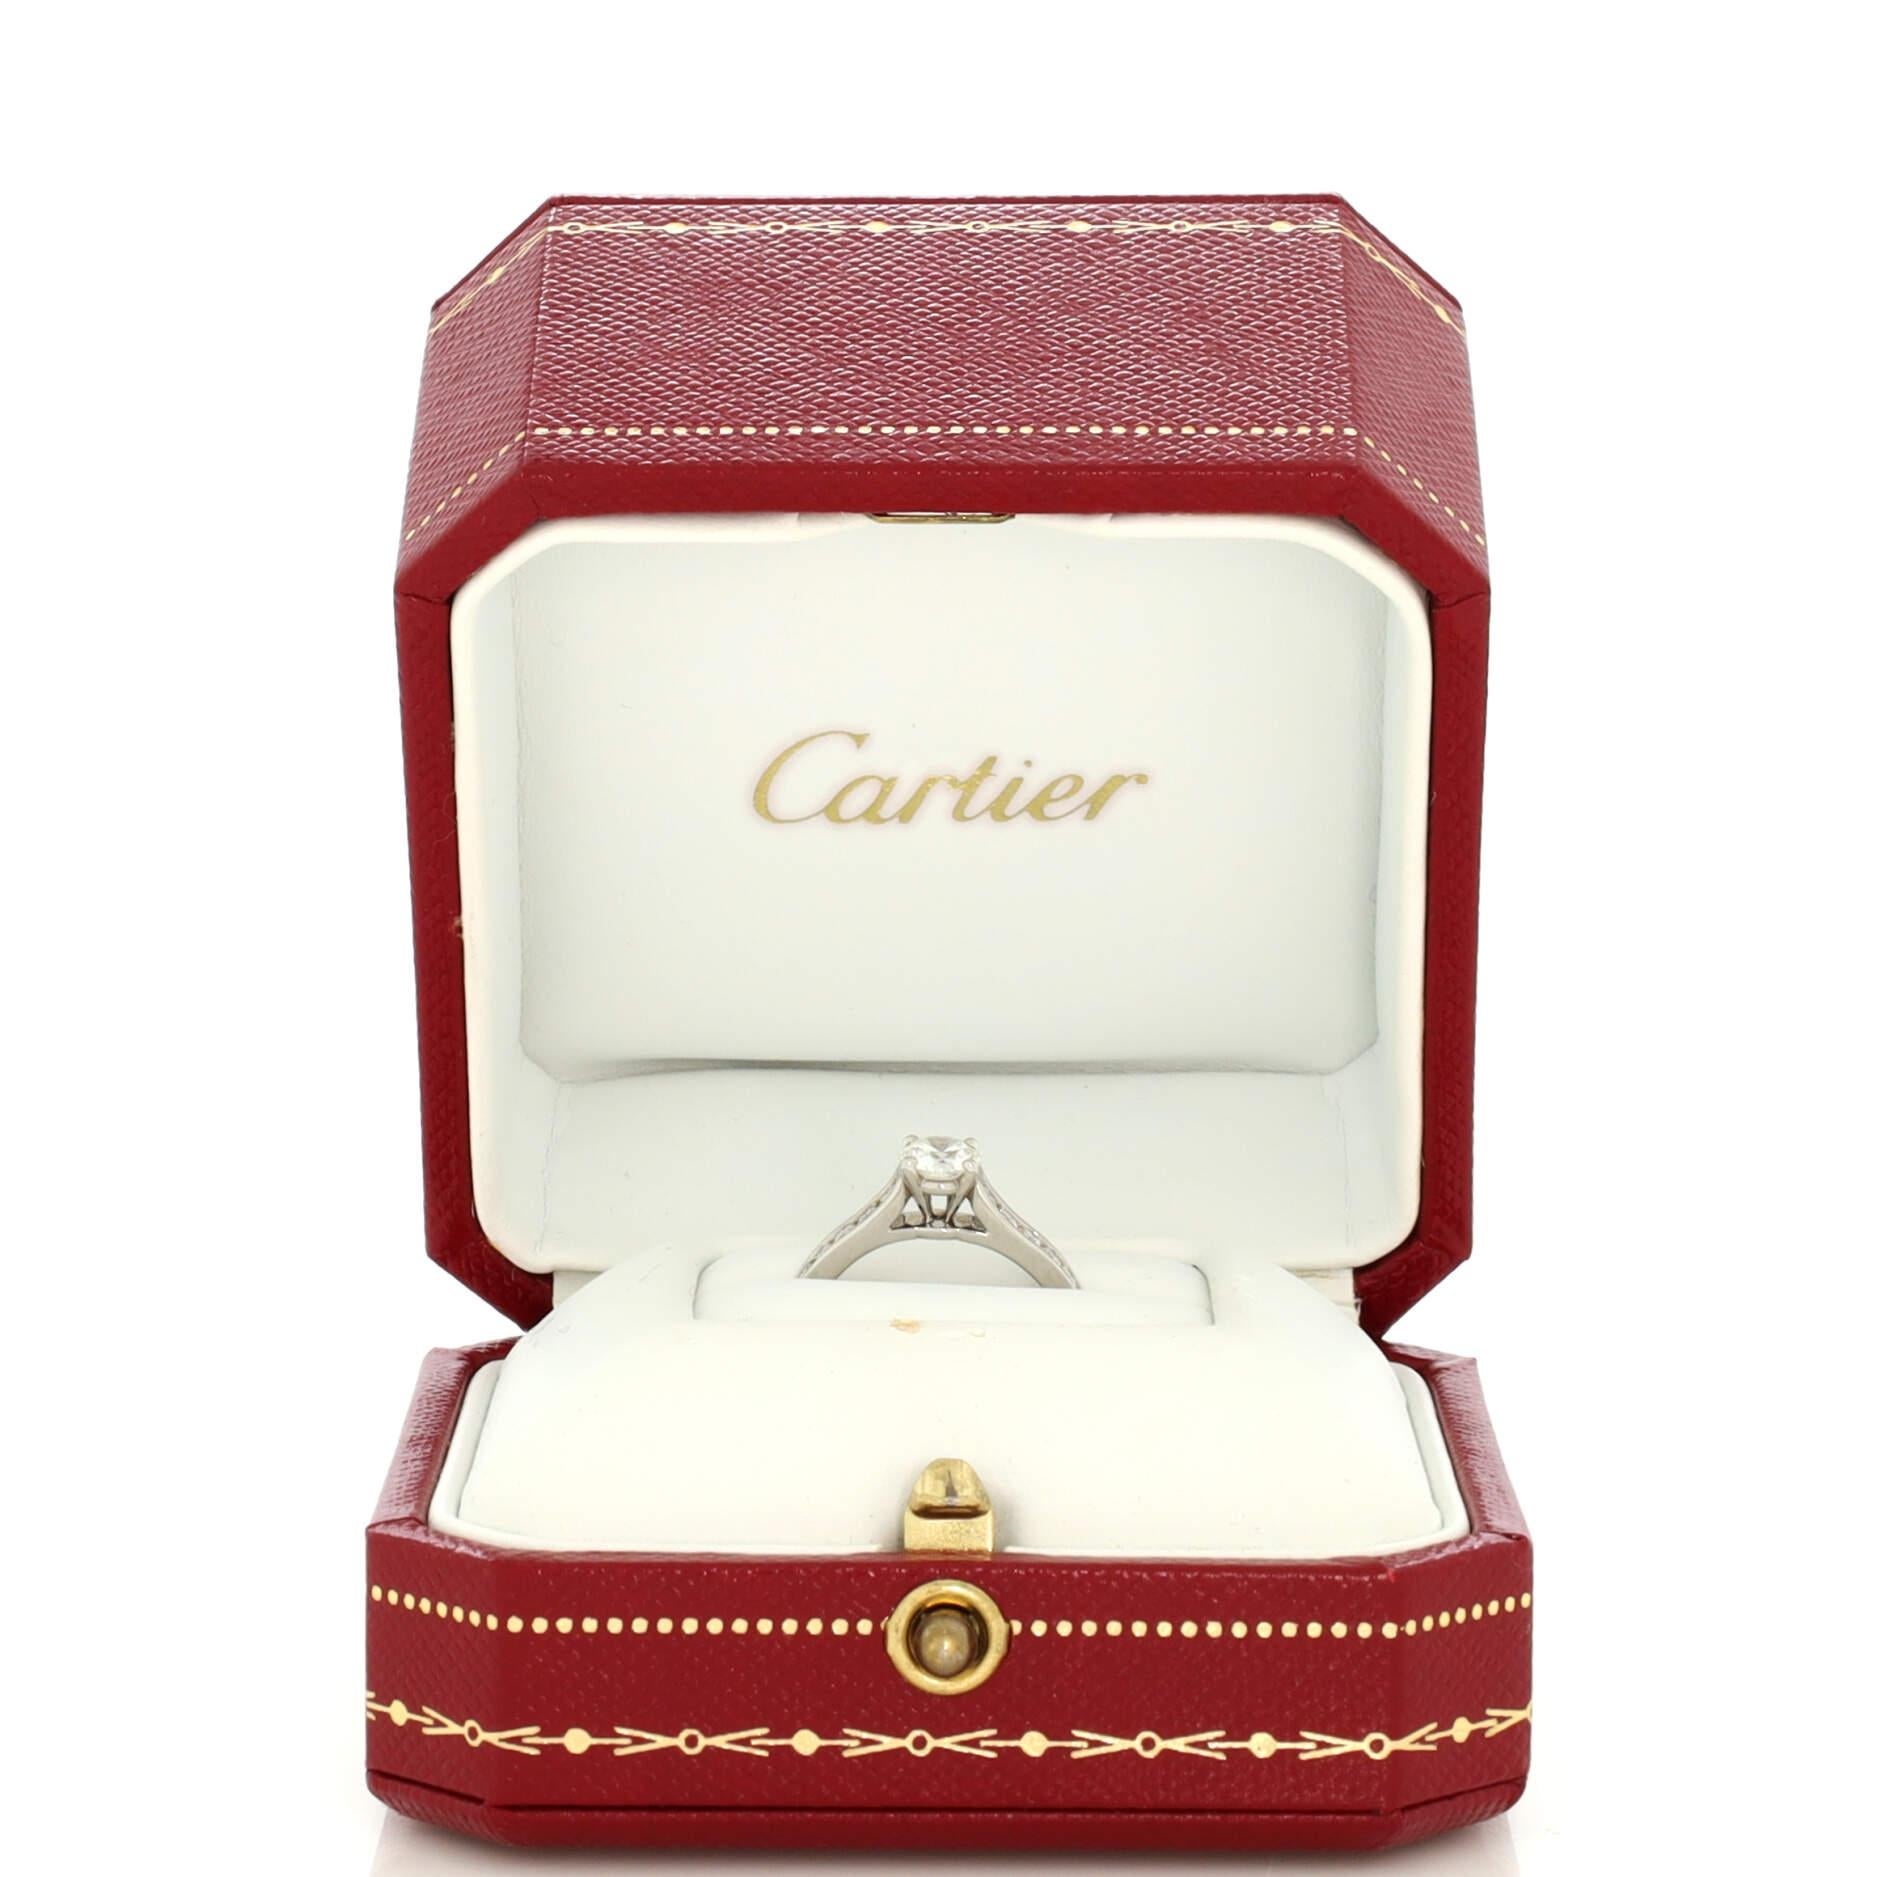 Condition: Great. Minor wear throughout.
Accessories: No Accessories
Measurements: Size: 5.25 - 50, Width: 2.00 mm
Designer: Cartier
Model: Solitaire 1895 Ring Platinum with RBC Diamond G/VVS1 and Pave Diamonds 0.41CT
Exterior Color: Silver
Item